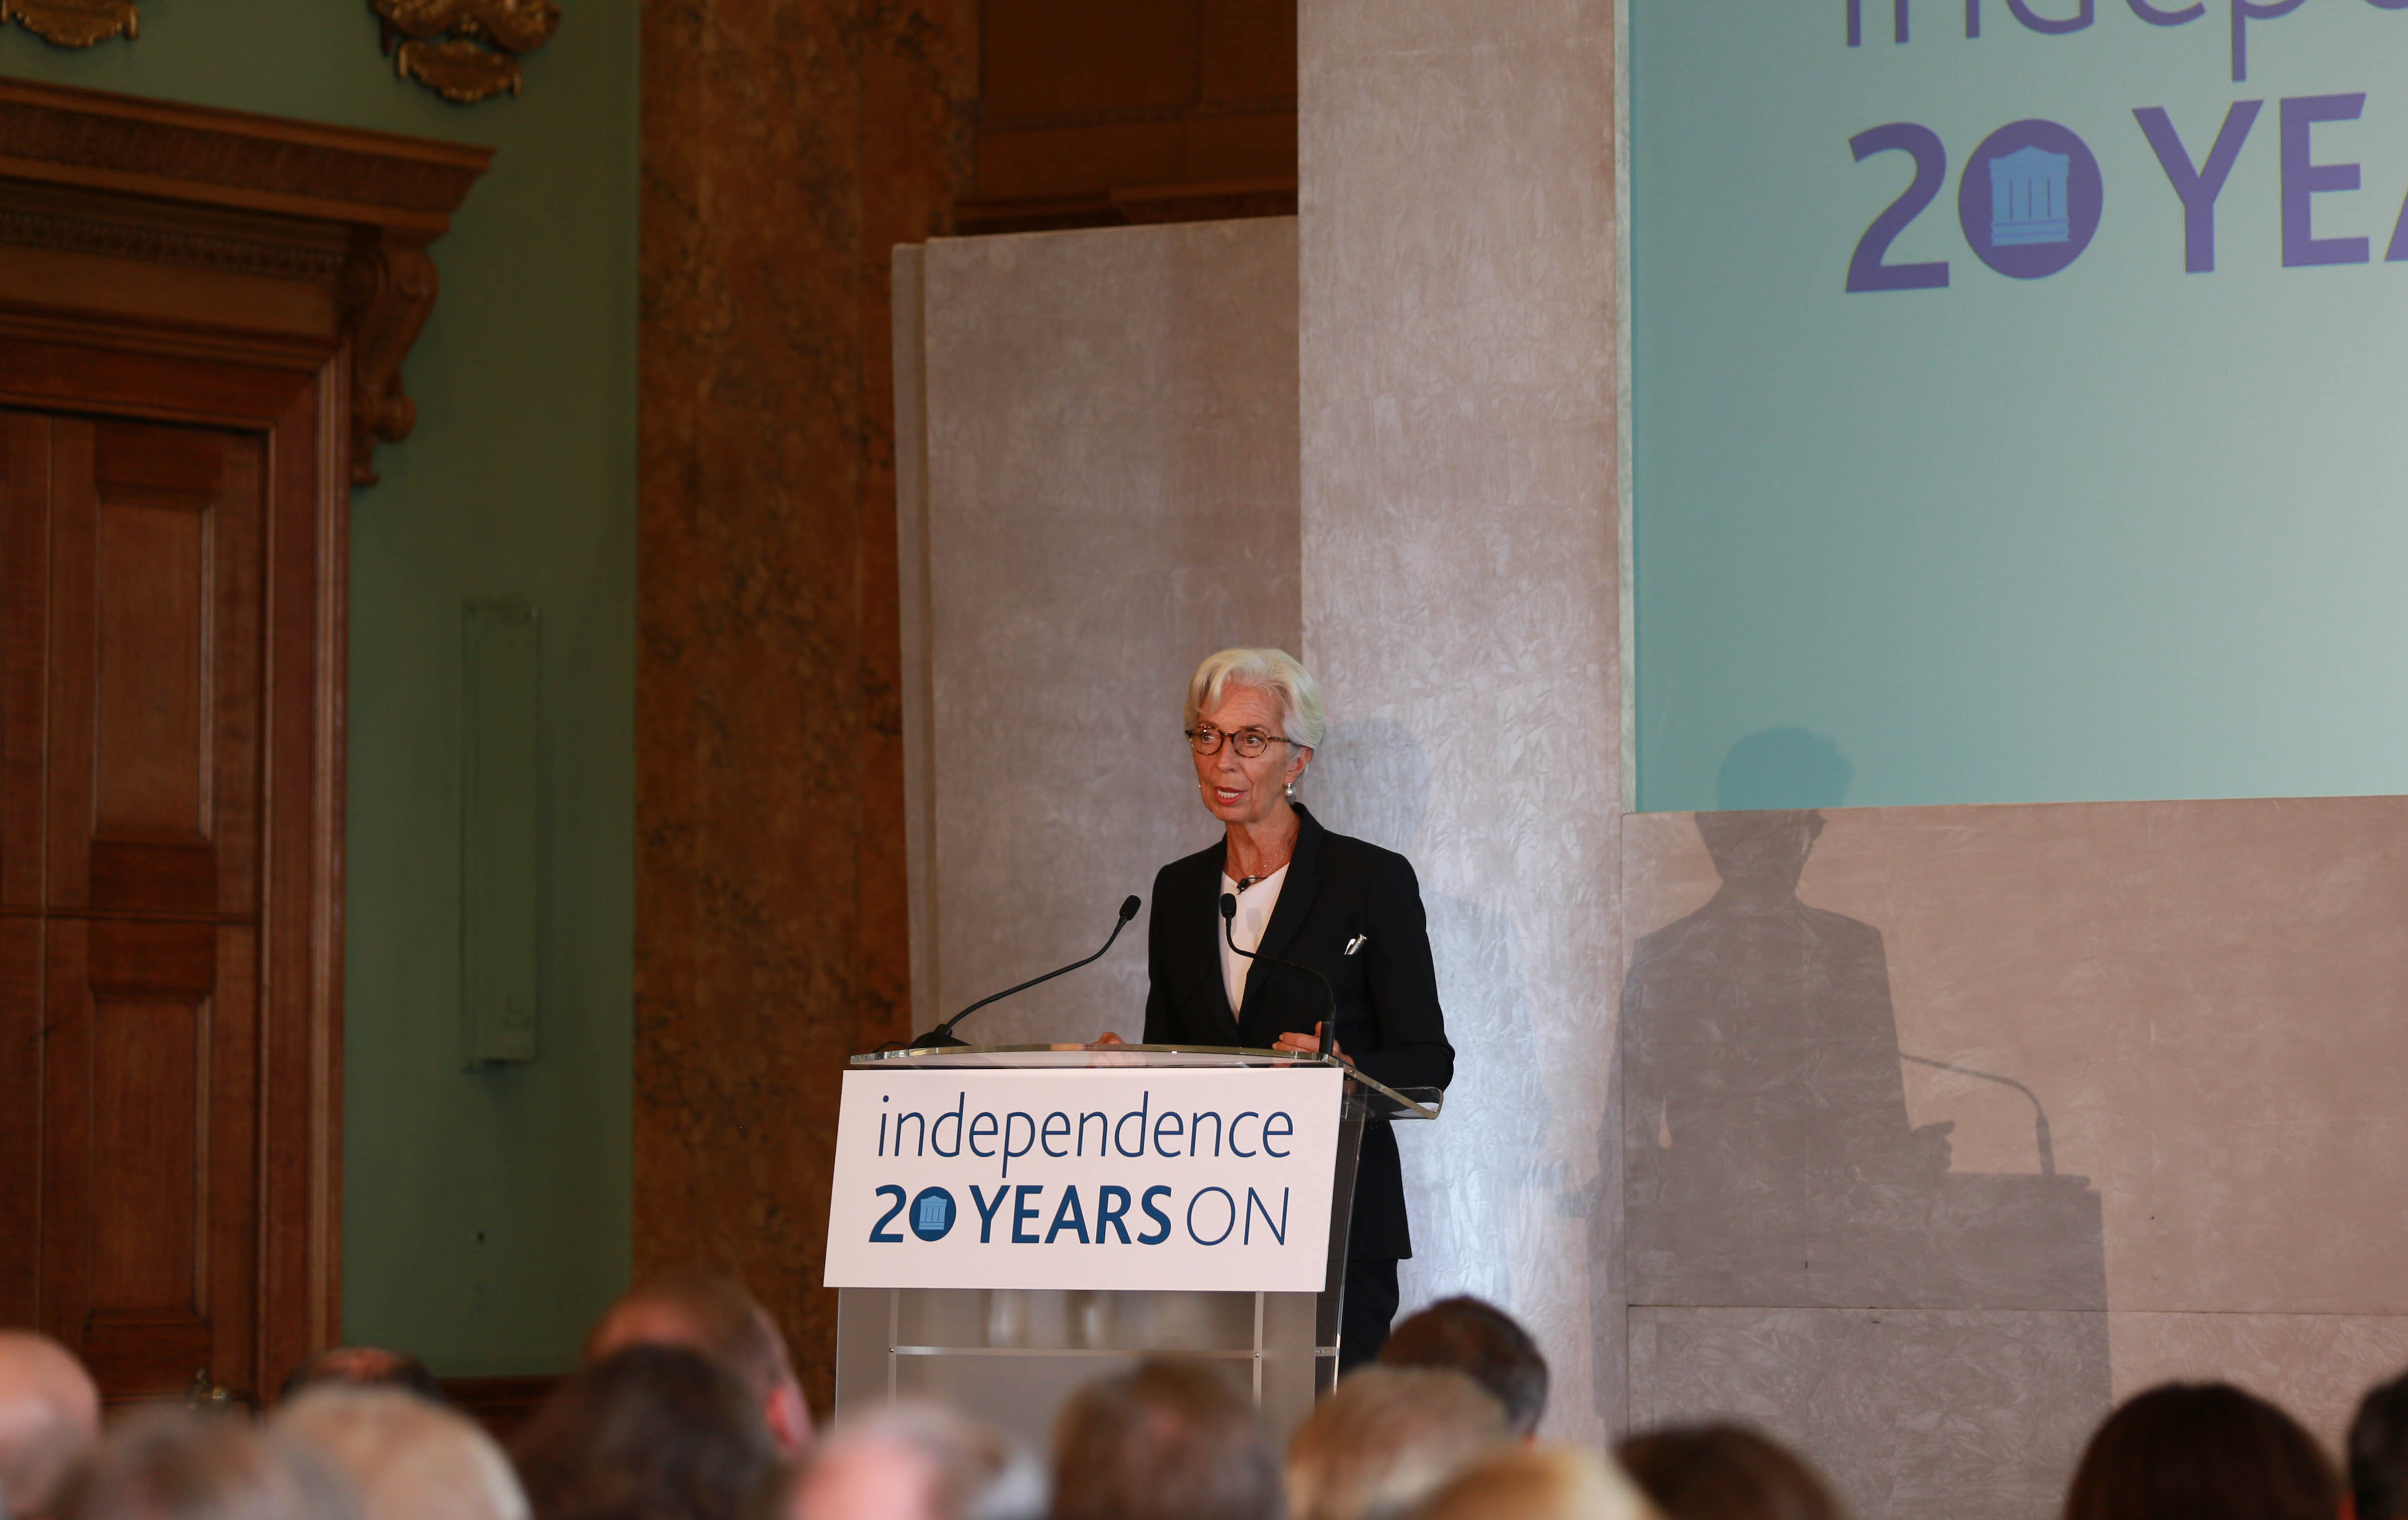 Christine Lagarde presenting at the Independence conference